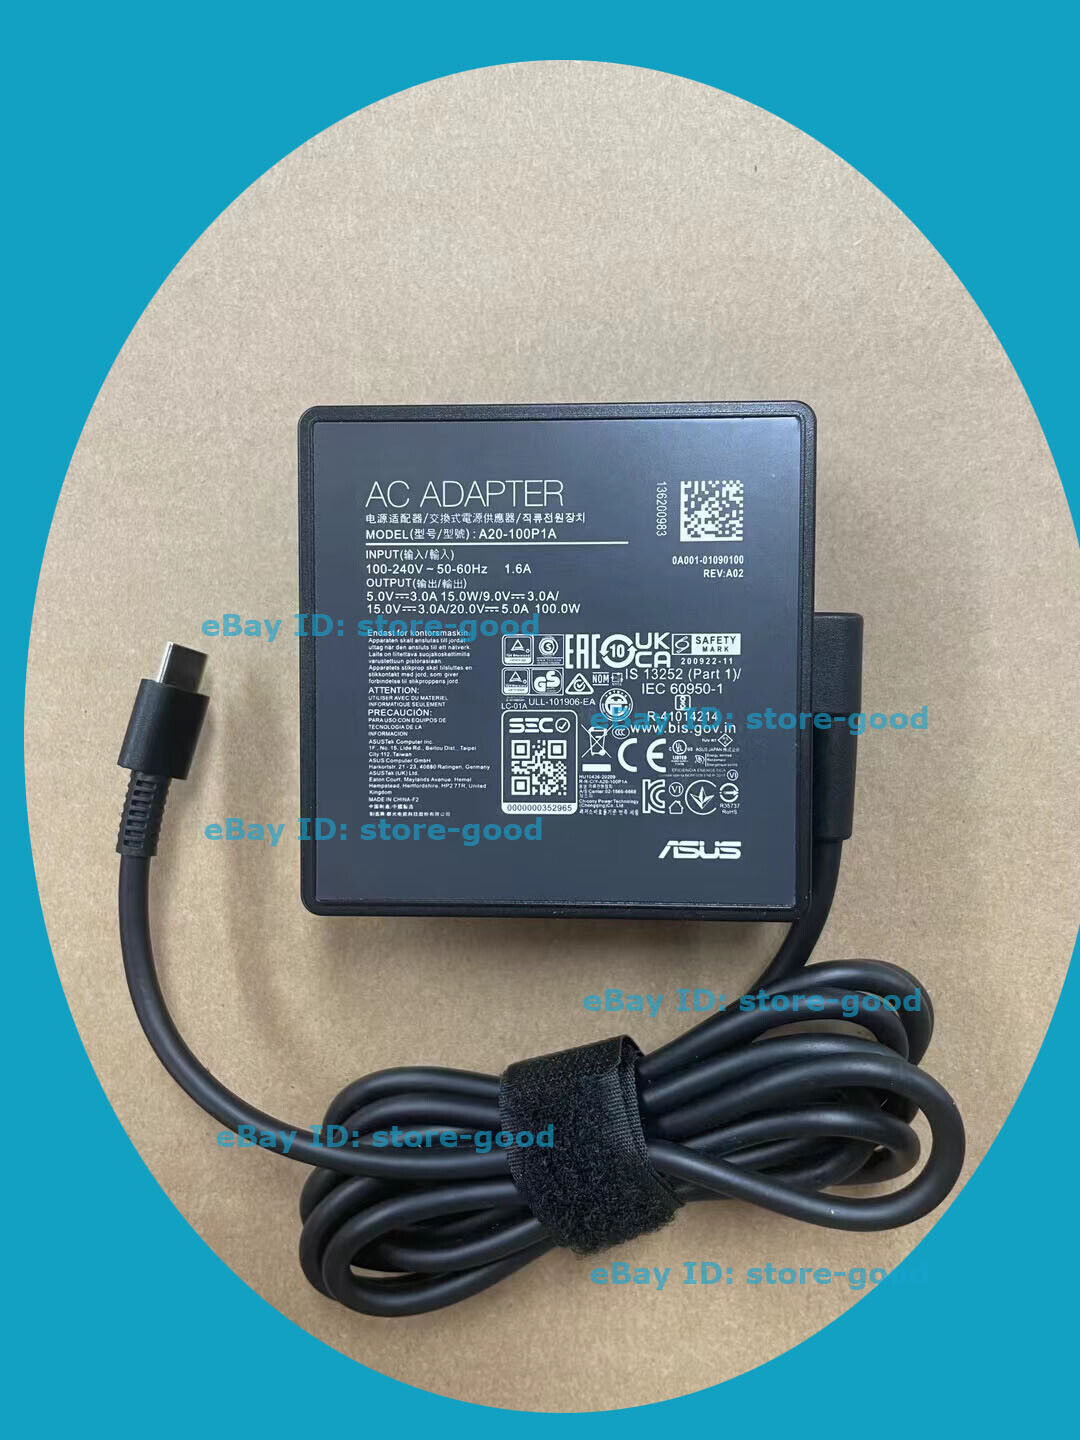 100w 20V 5A type-C A20-100P1A adapter charger power supply fit MSI A21-100P1A